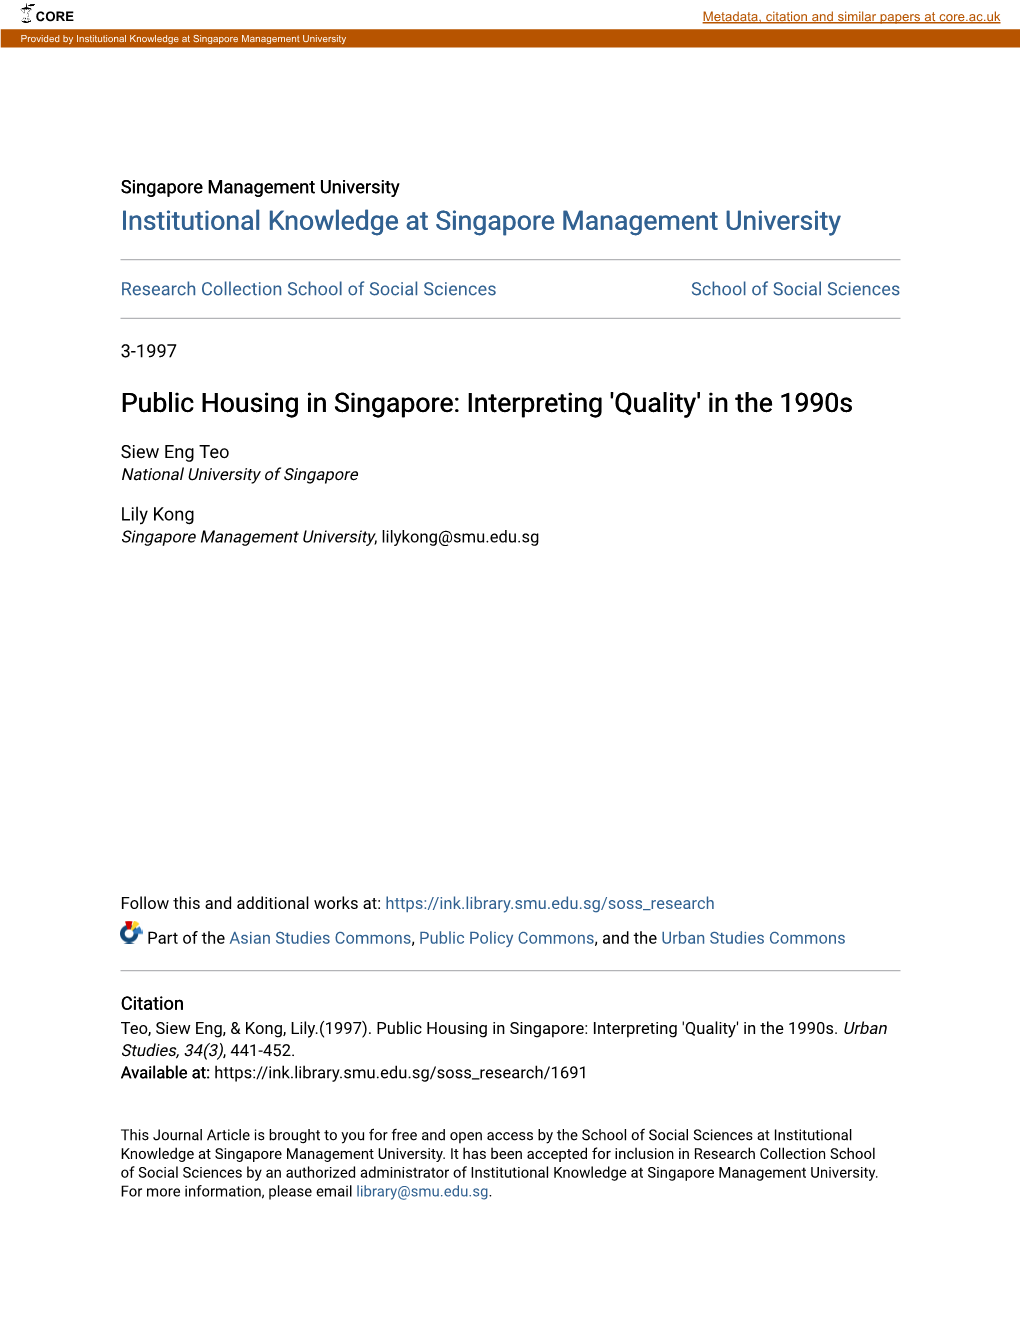 Public Housing in Singapore: Interpreting 'Quality' in the 1990S